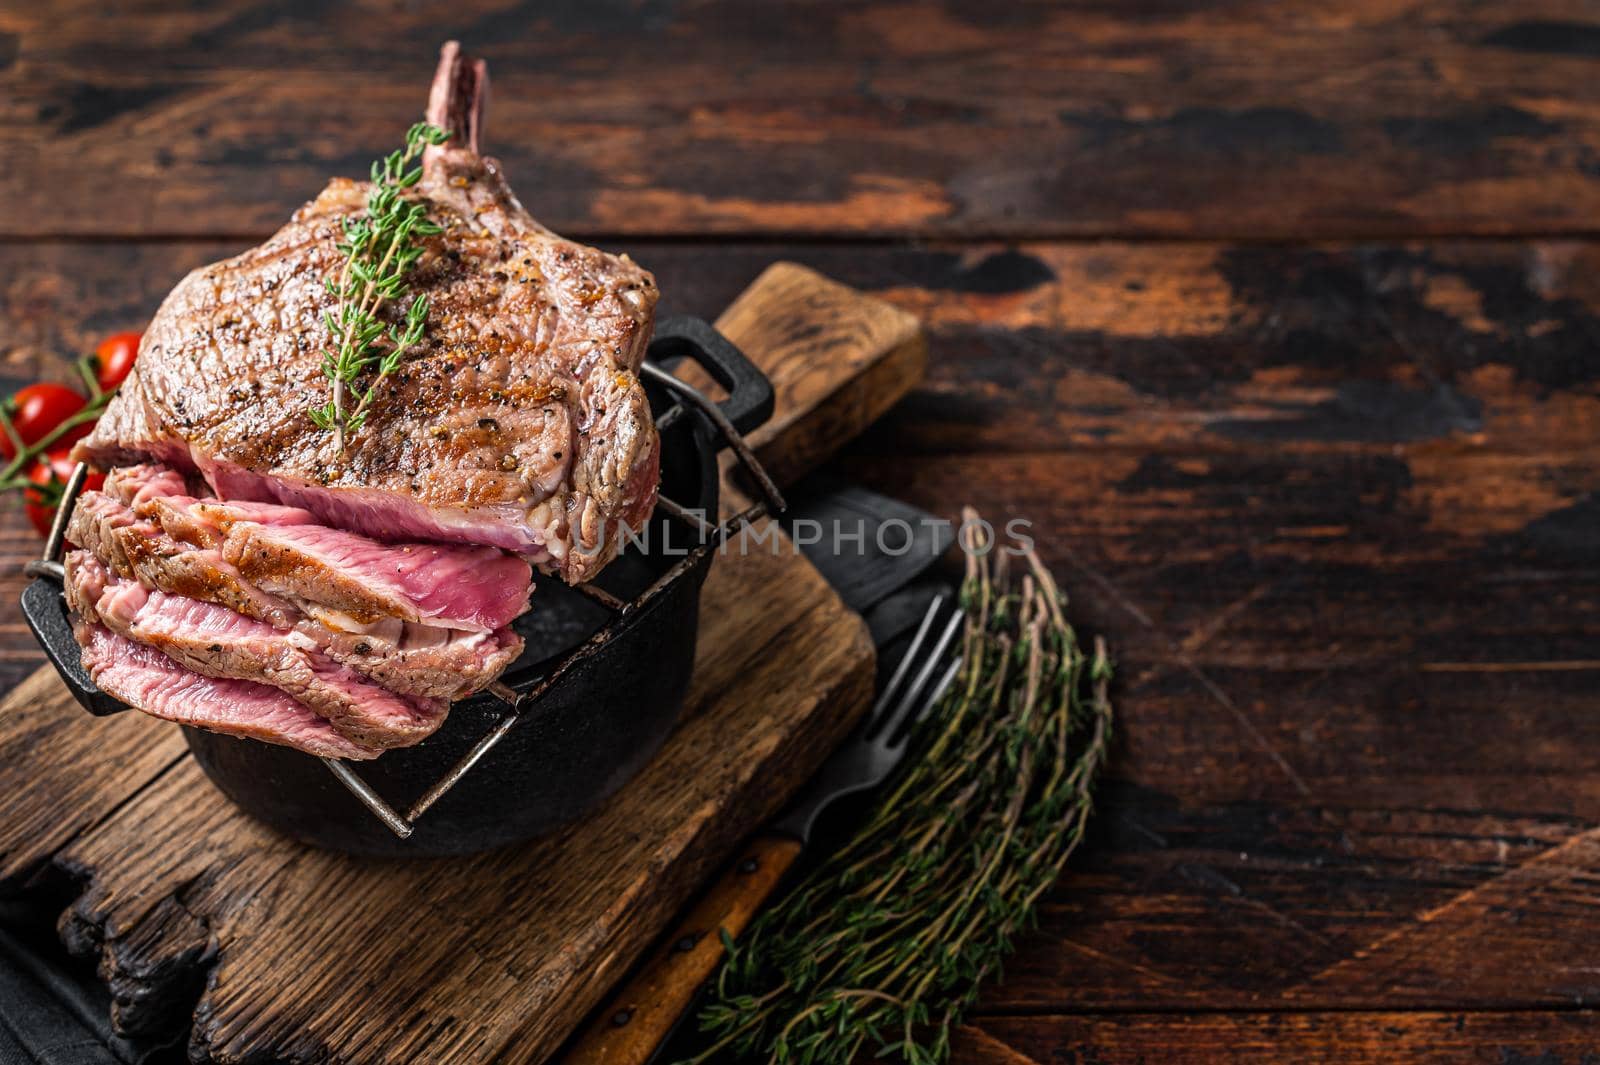 Grilled Tomahawk rib eye steak on grill with herbs. Wooden background. Top view. Copy space.